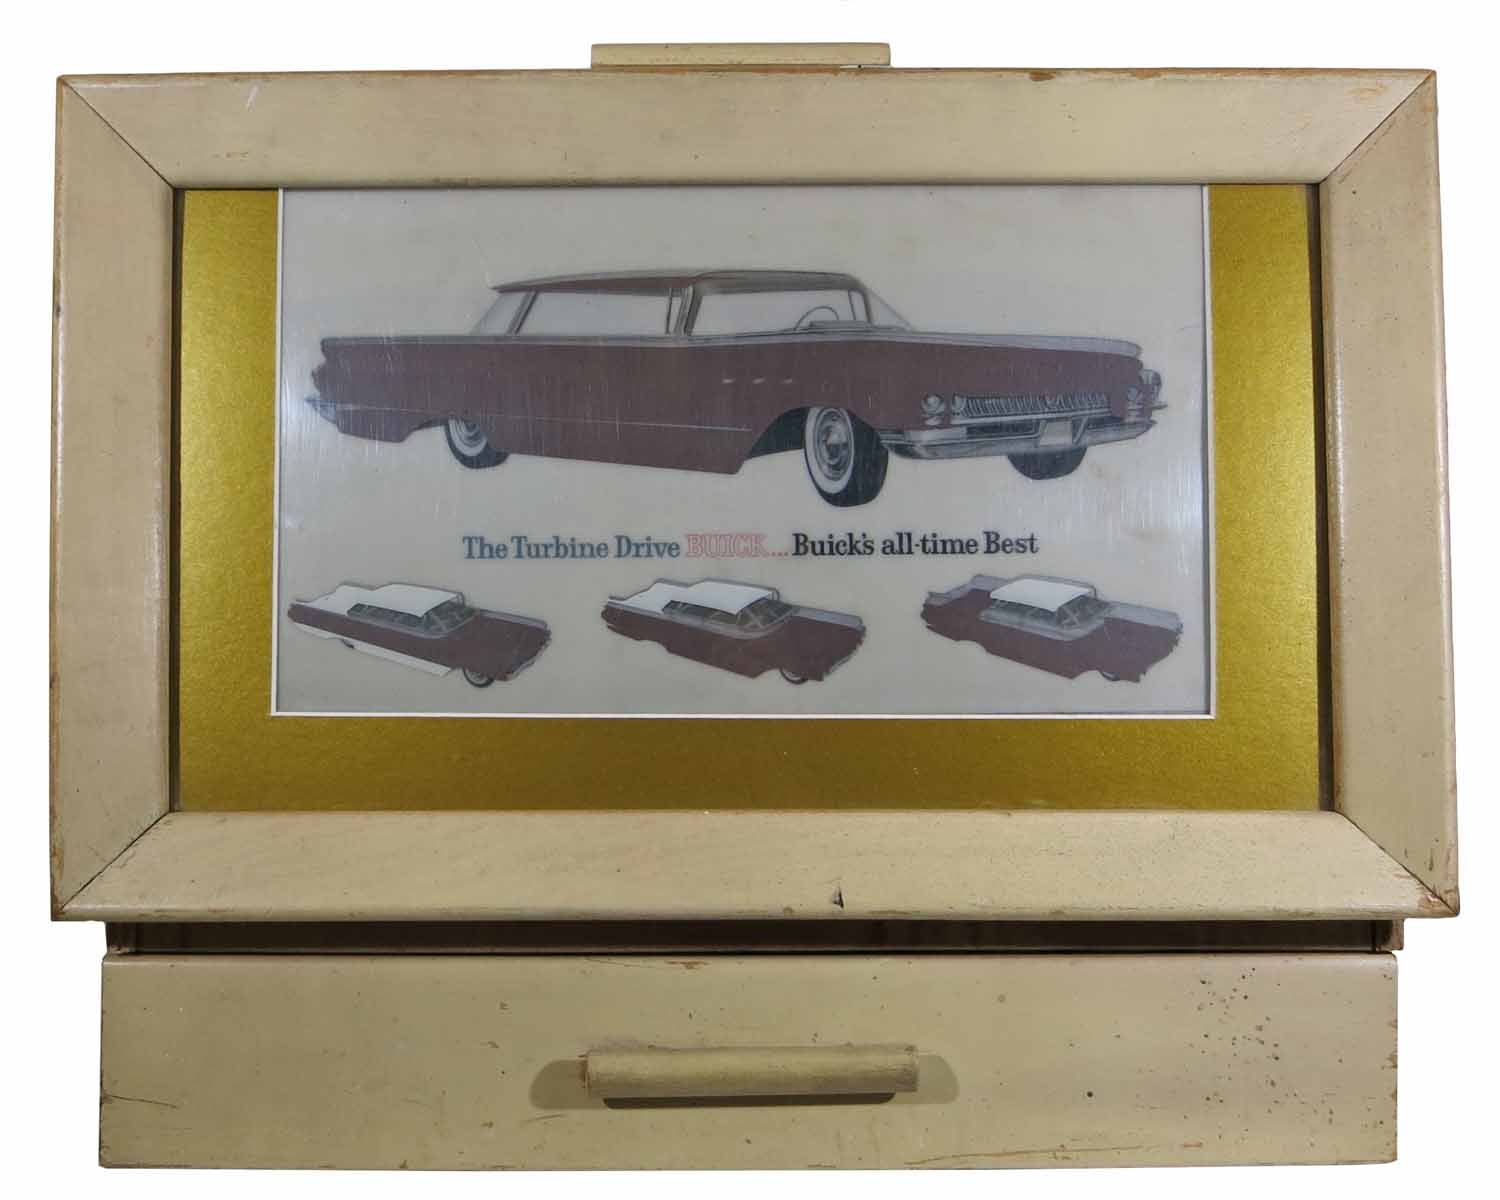 [Buick Dealer's Backlit Showroom Display Case] - The TURBINE DRIVE BUICK... BUICK'S ALL-TIME BEST. 1960 Dealer's Backlit Showroom Display Case Complete with 33 Transparencies Displaying Interior & Exterior Design Choices and Three Upholstery Sample Catalogues